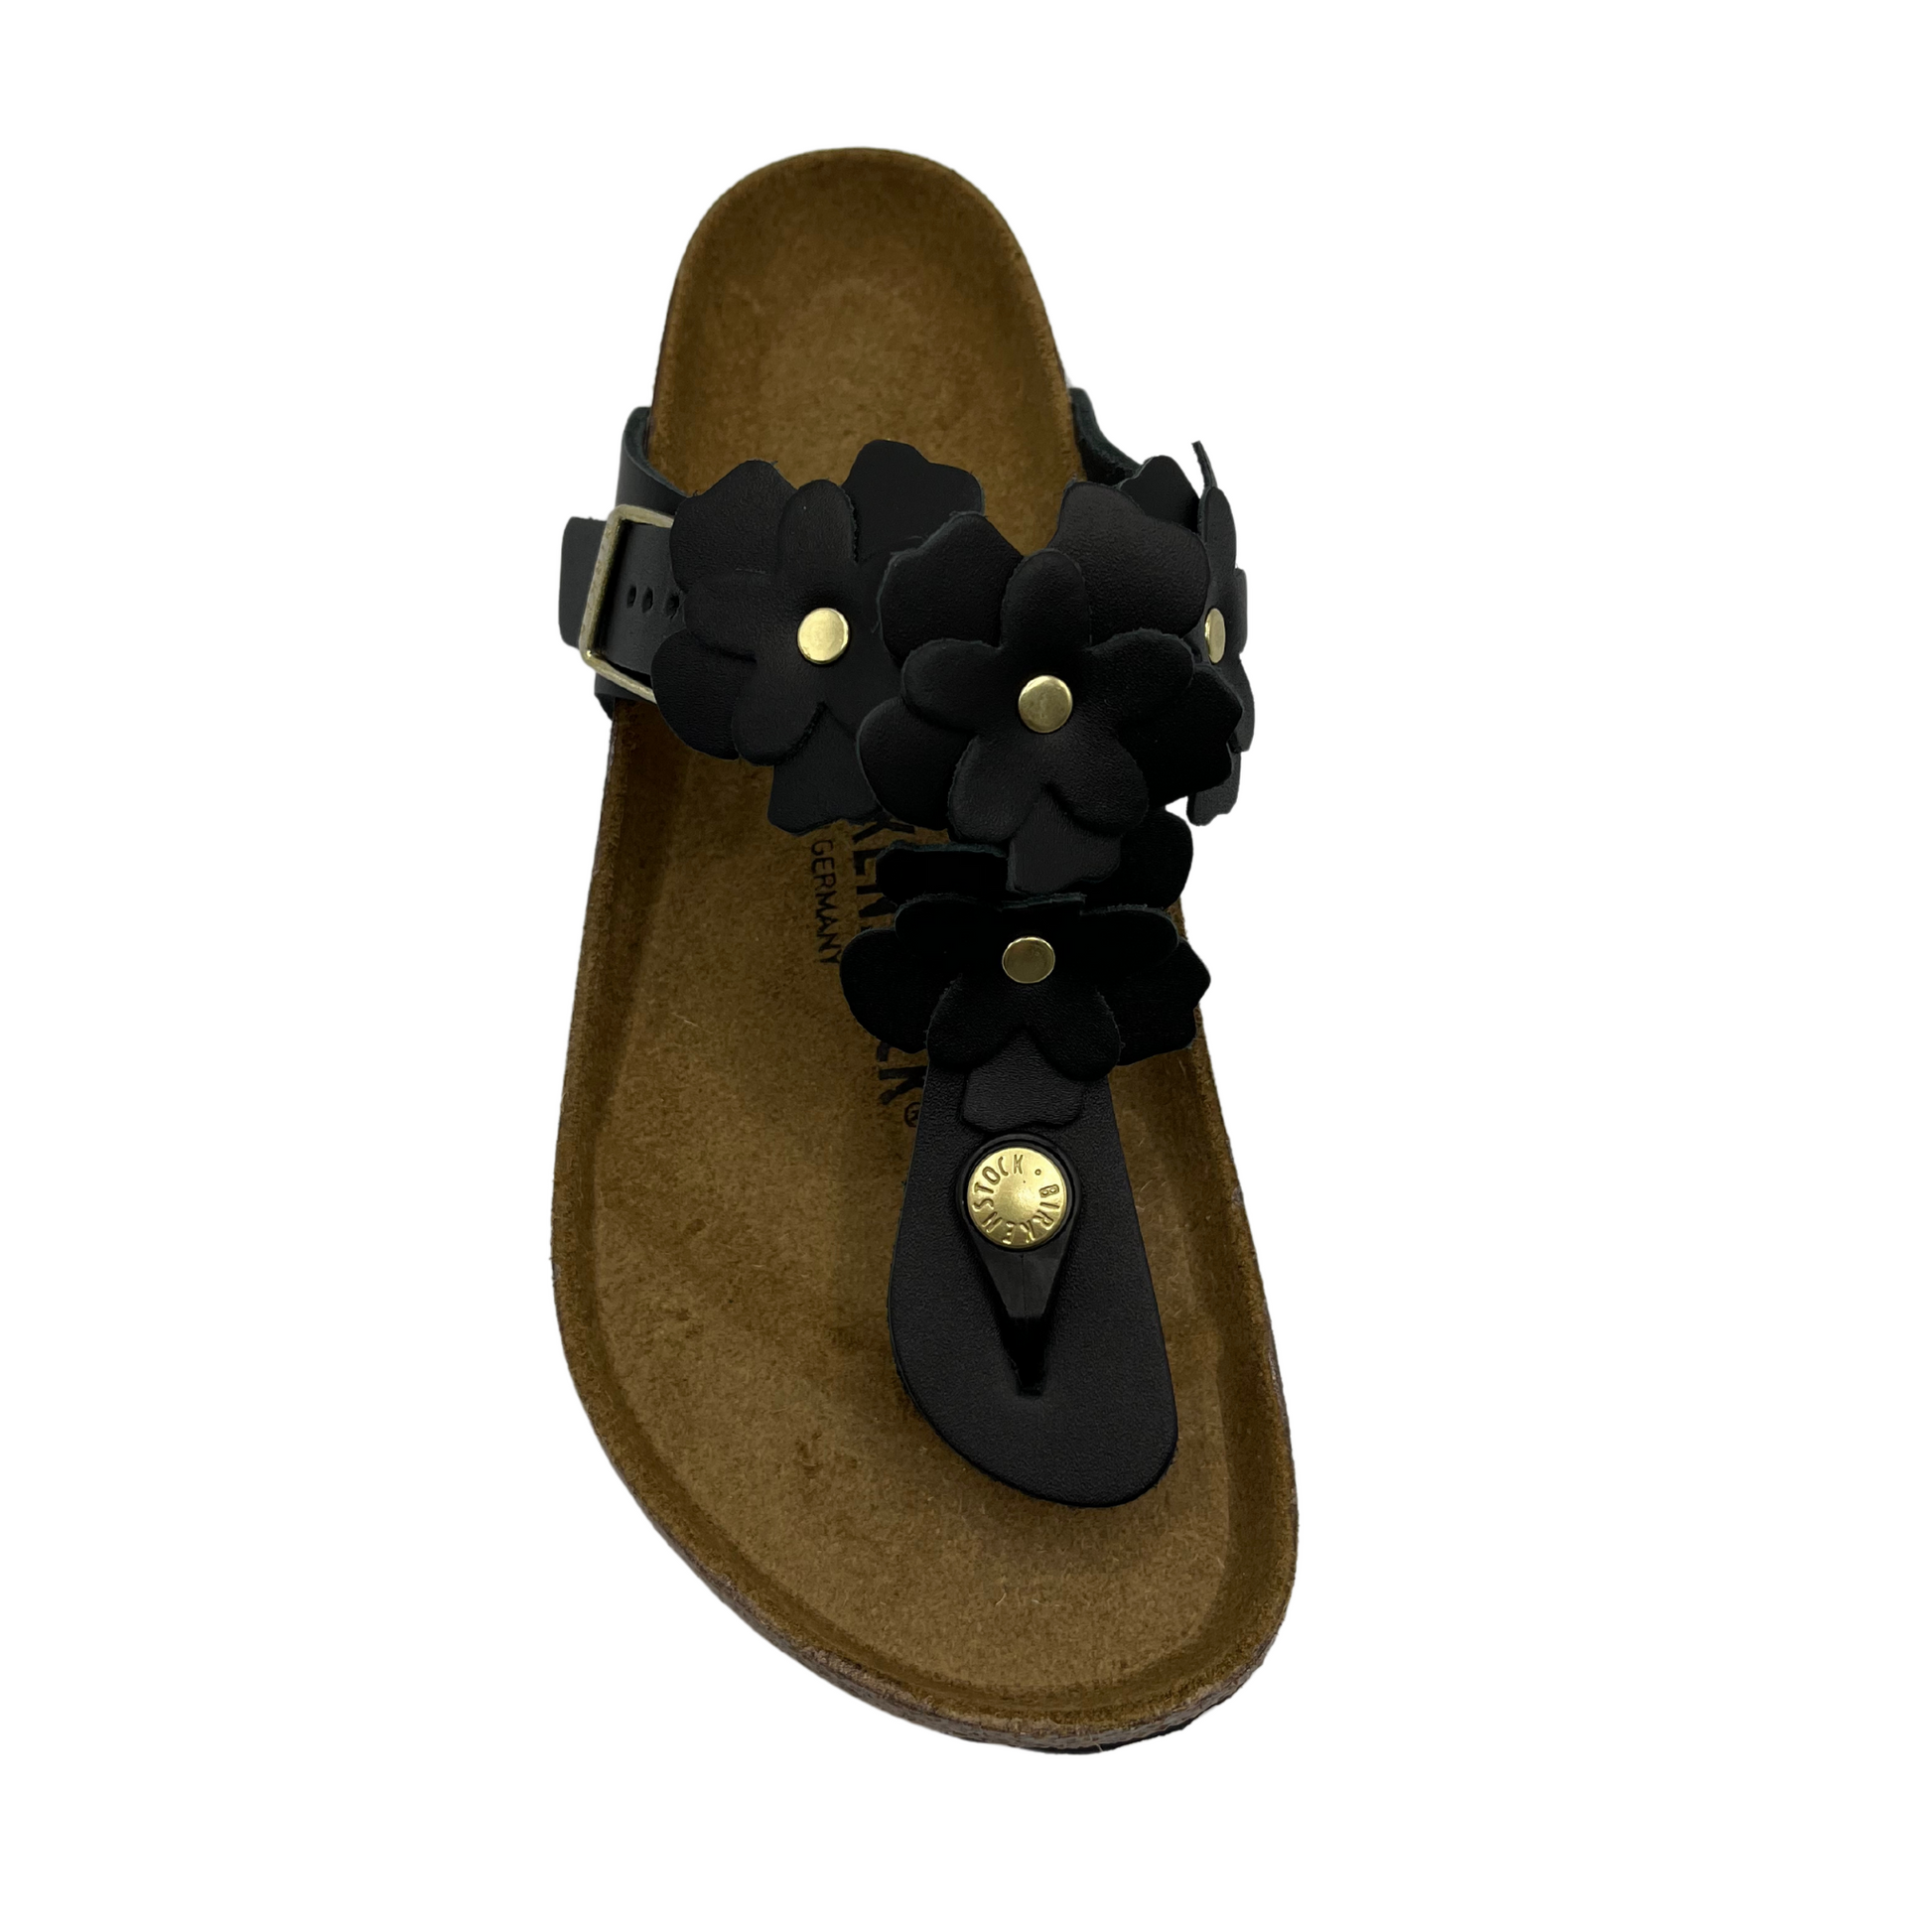 Top view of black leather sandals with flower shaped details and adjustable strap